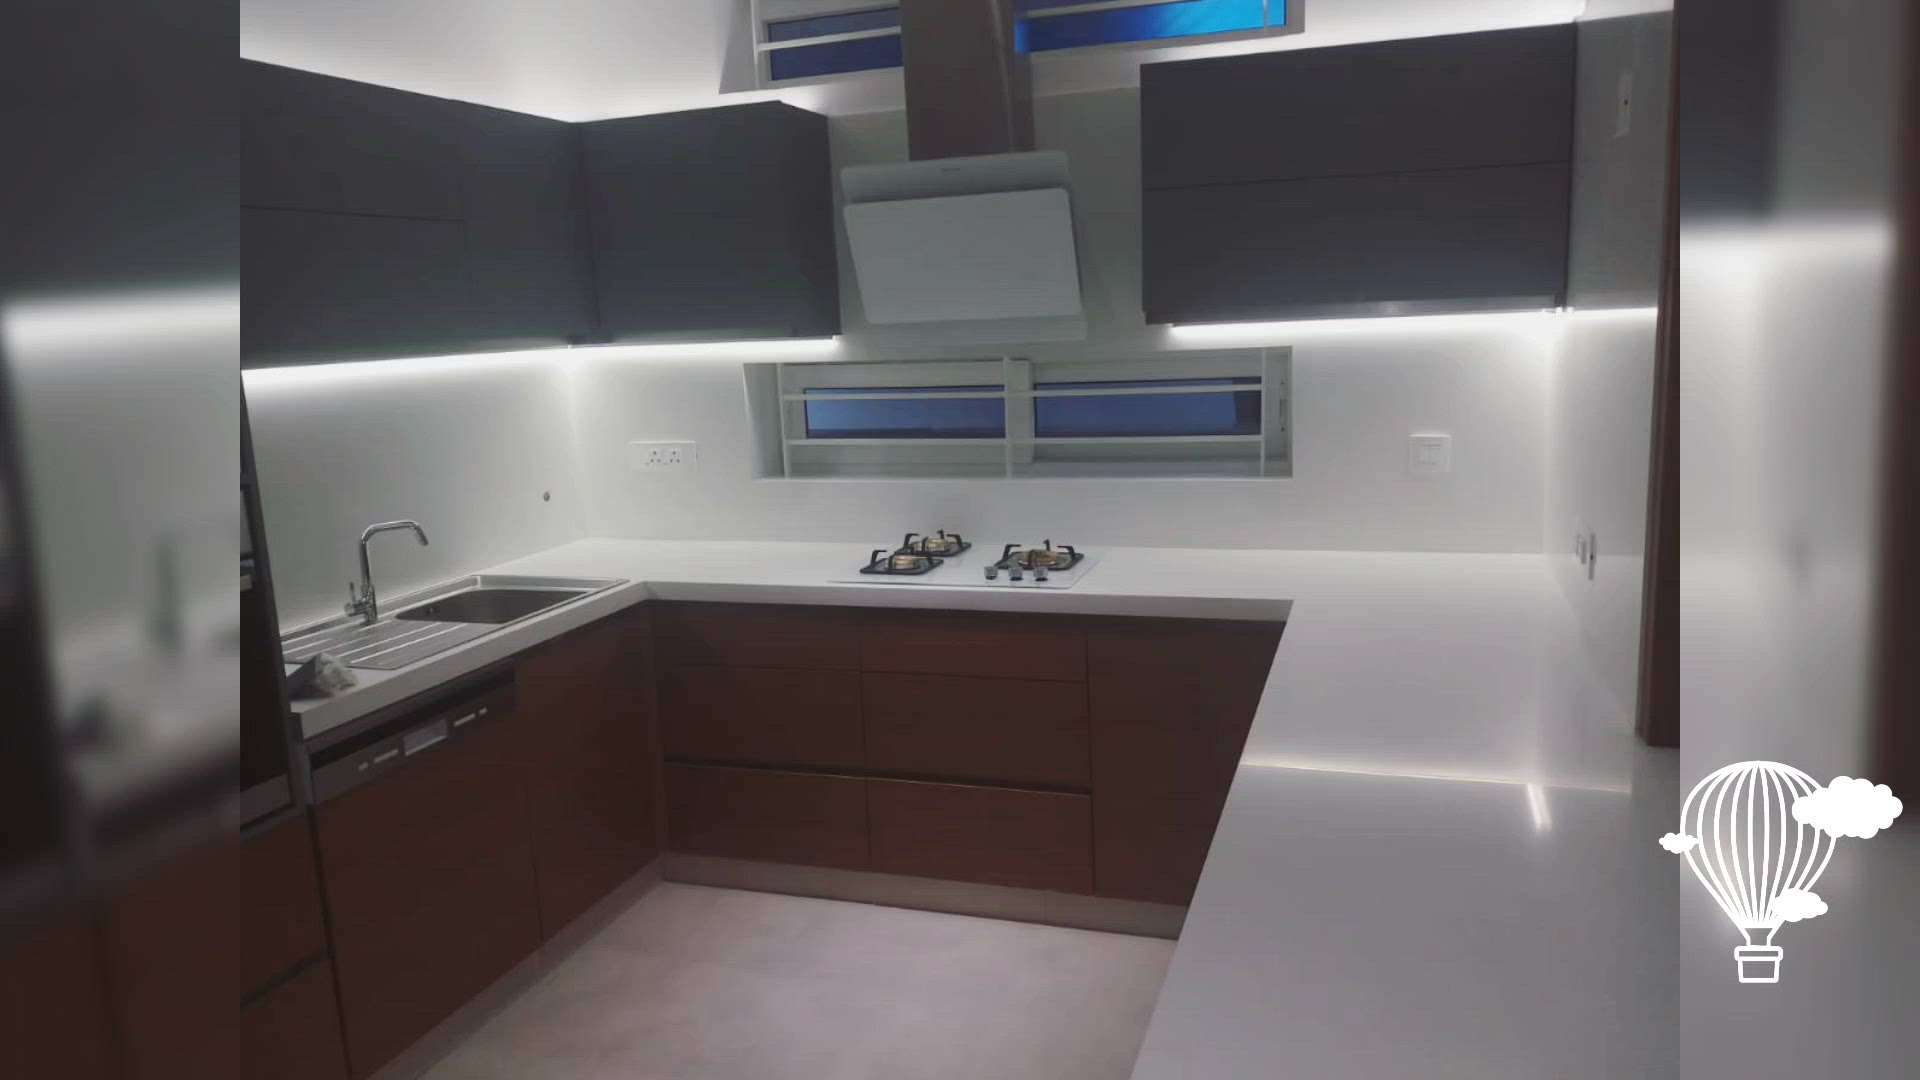 white kitchen counter top used with Haique Quartz  #kitchencountertops  #kitchencounter